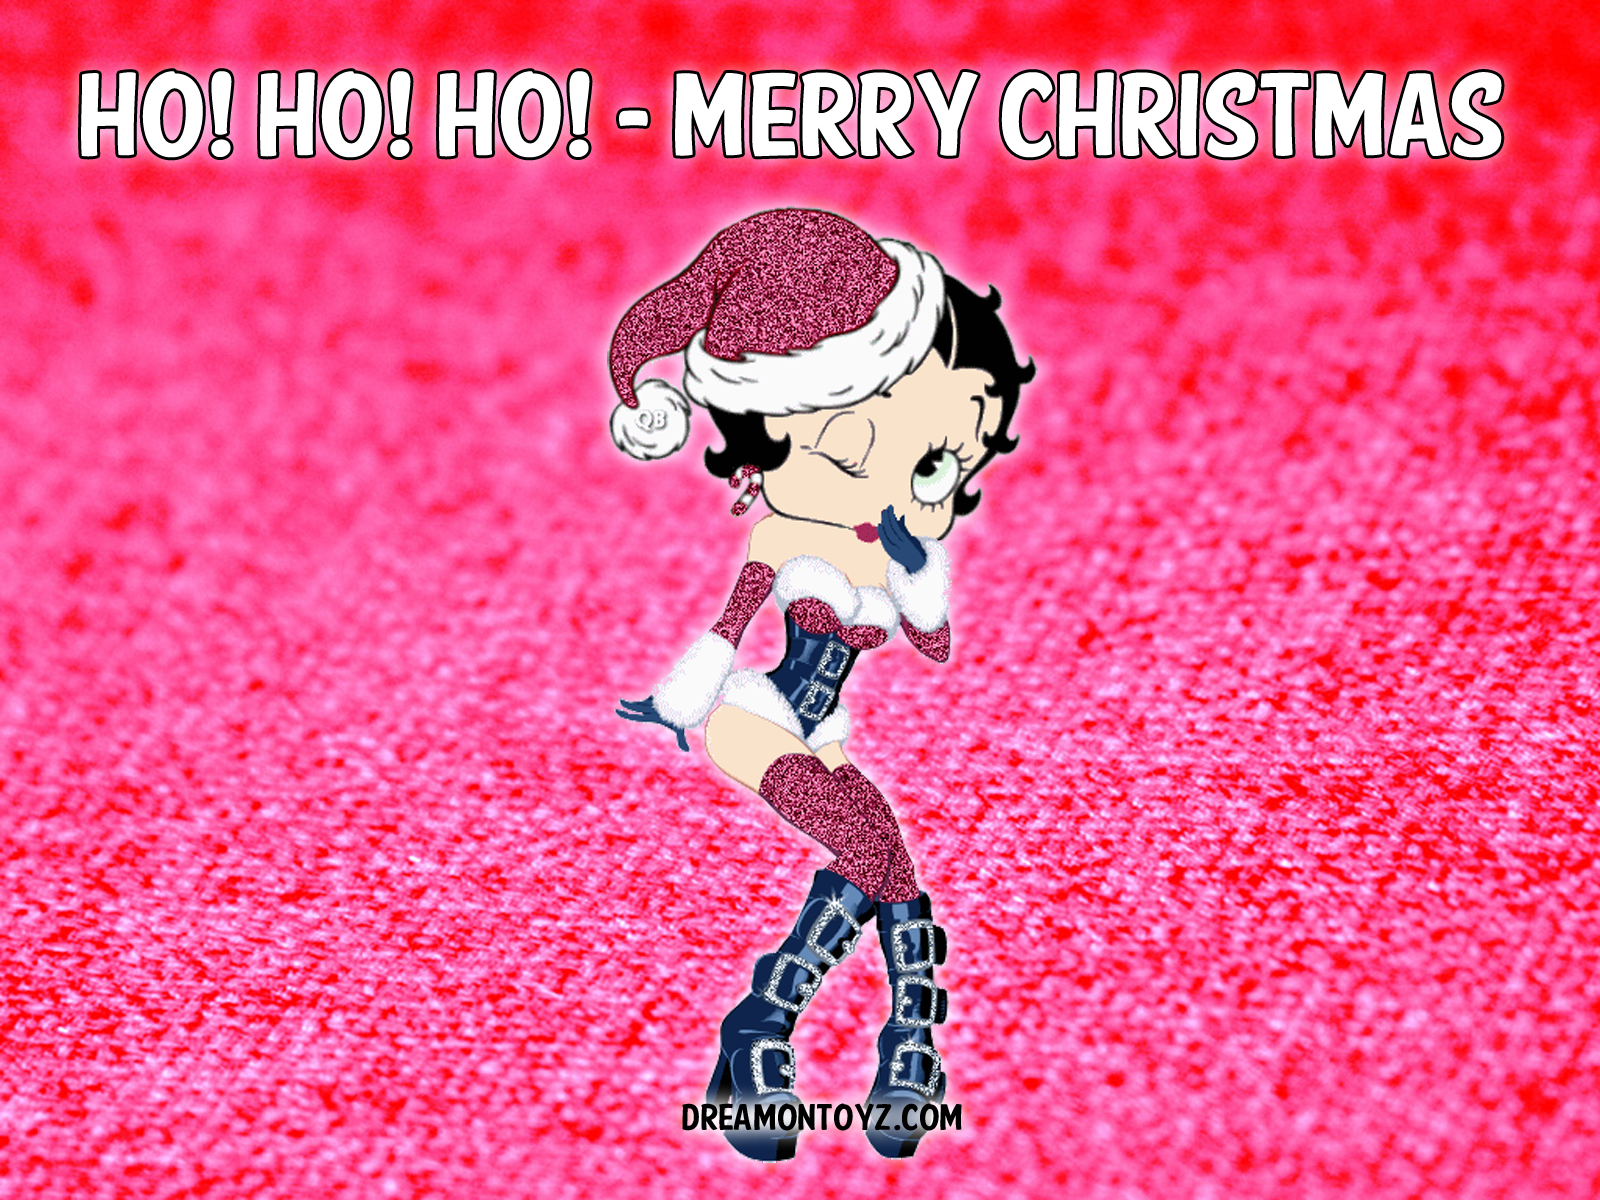 Boop Pictures Archive Santa Betty Merry Christmas Wallpaper